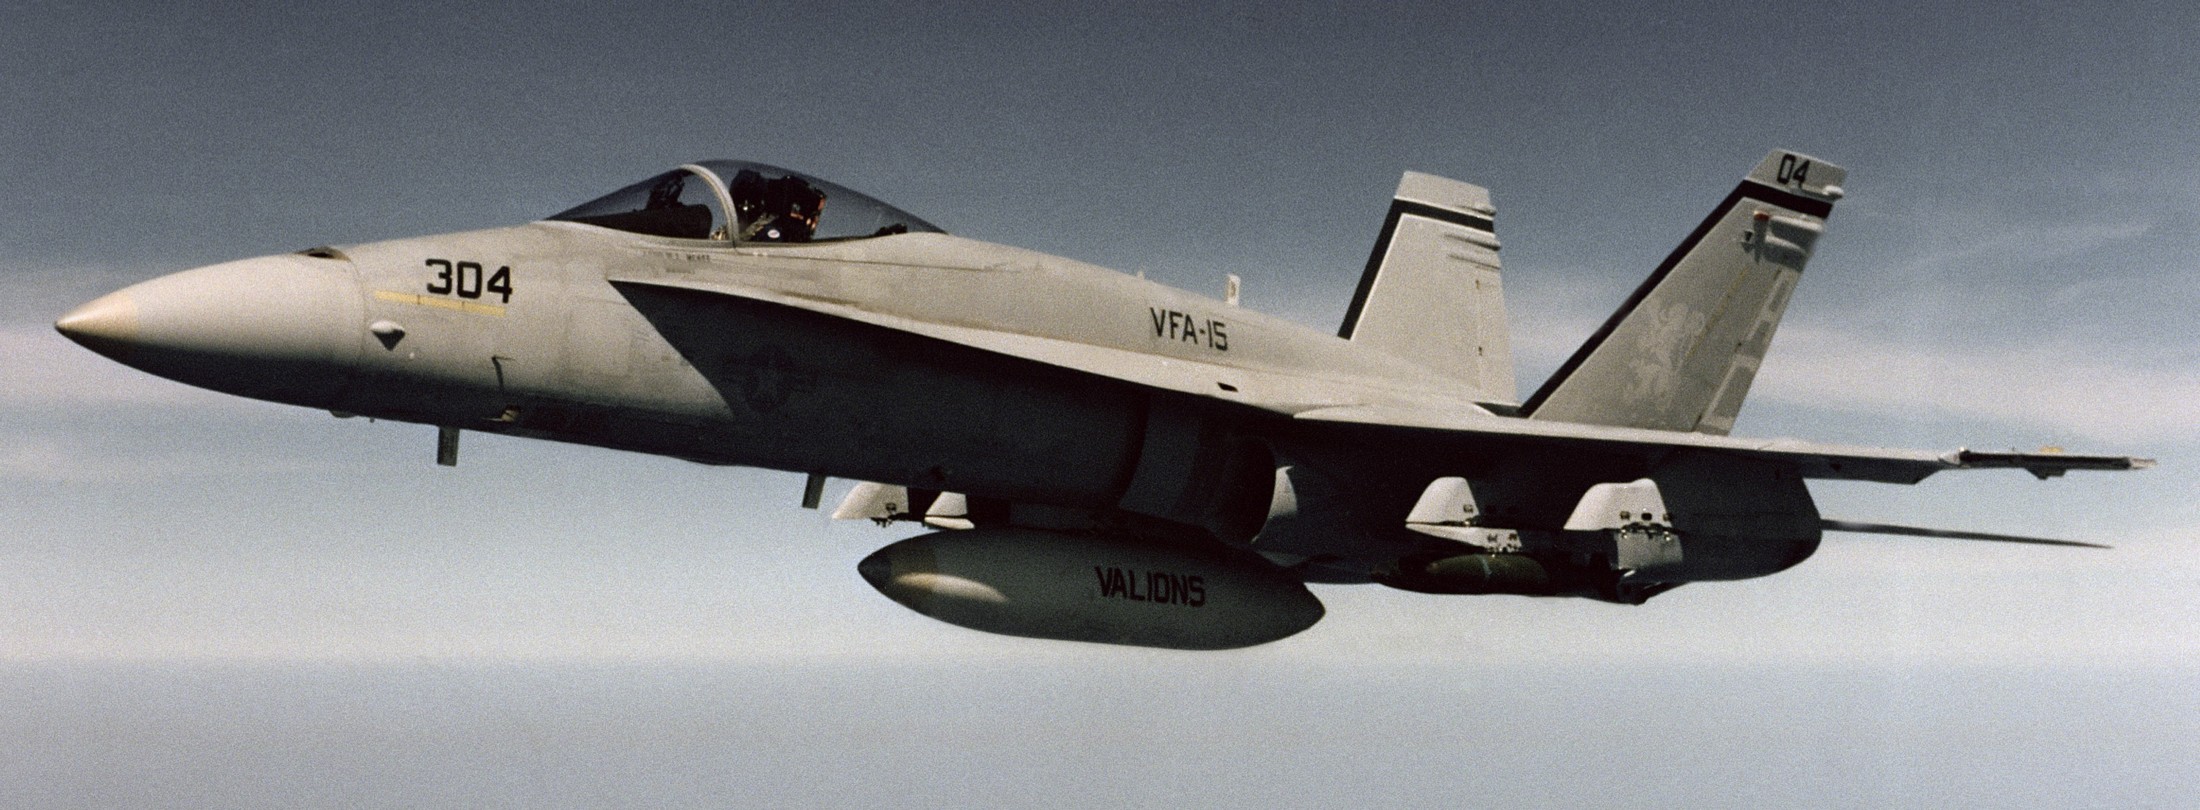 vfa-15 valions strike fighter squadron f/a-18a hornet us navy 108